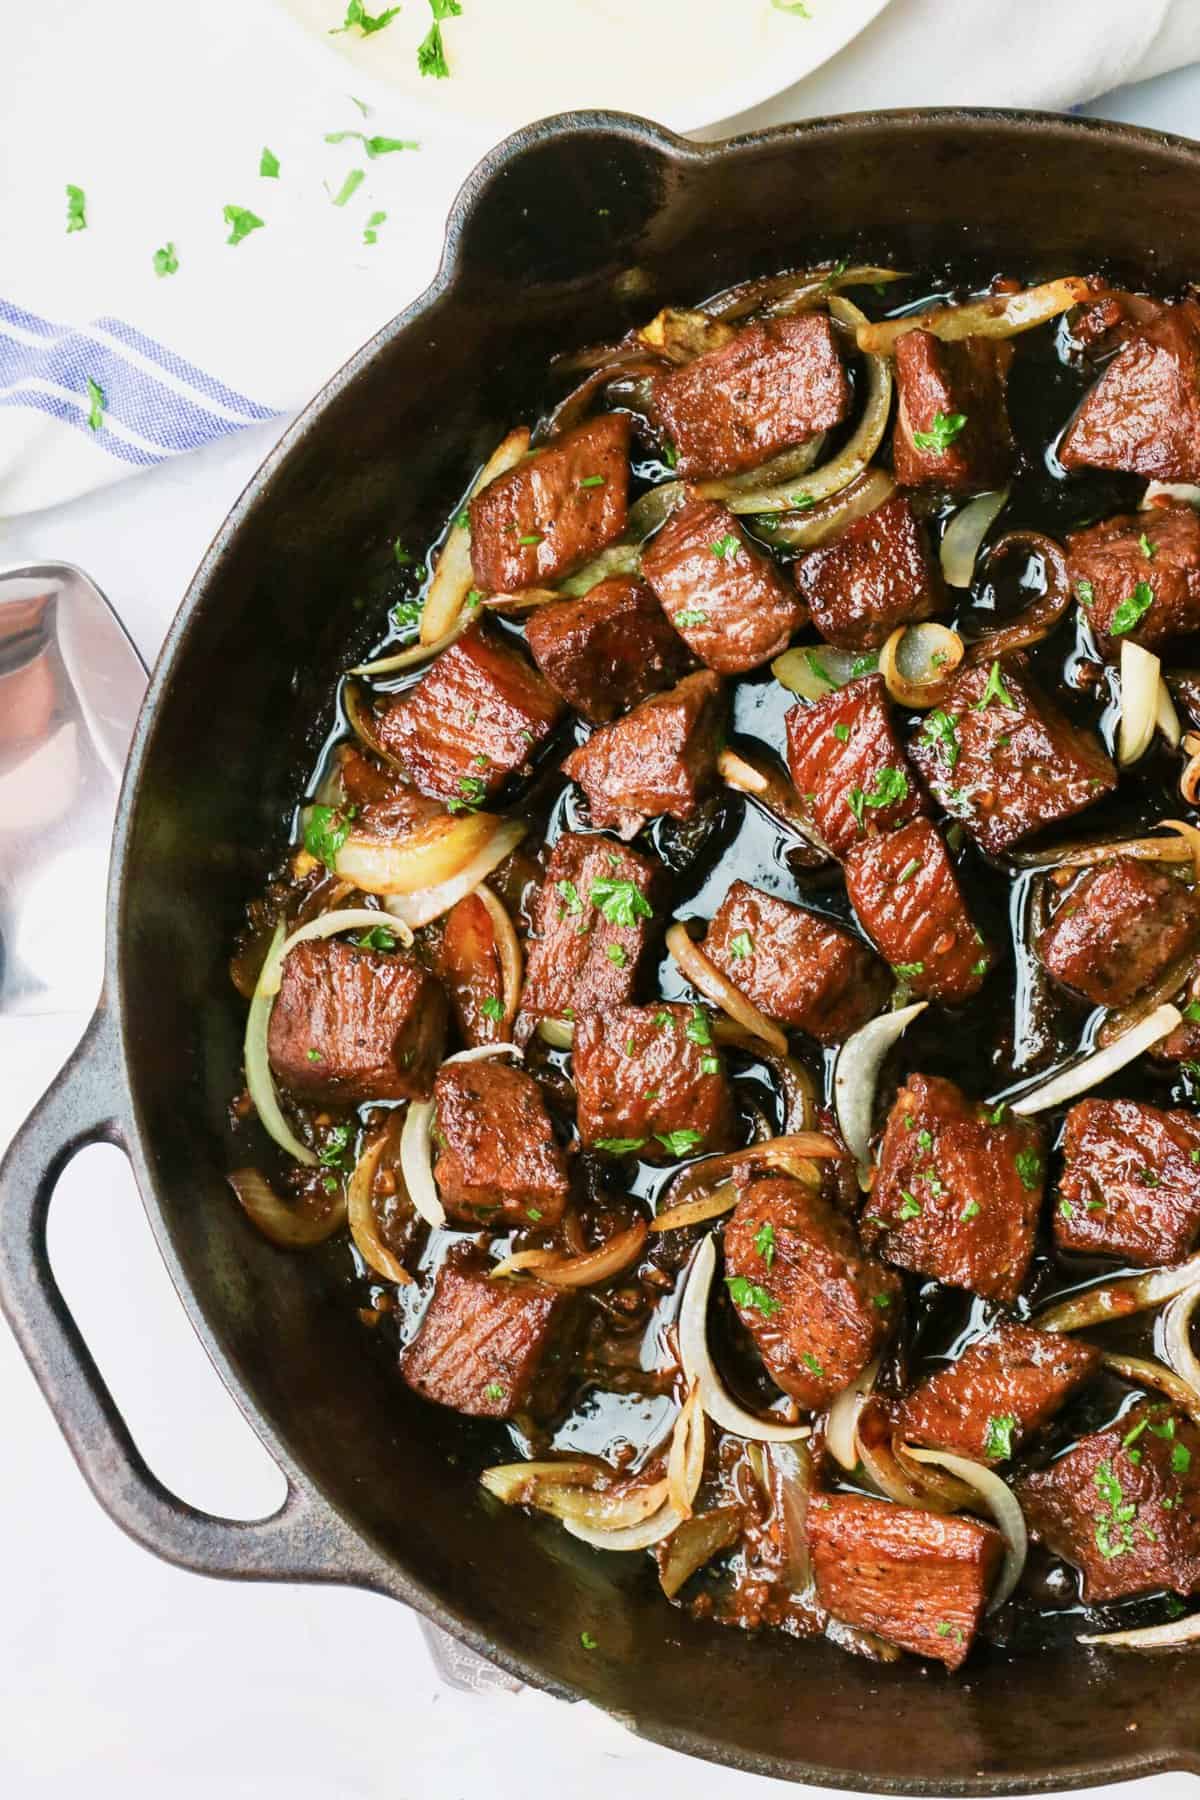 Insanely delicious steak tips ready to serve